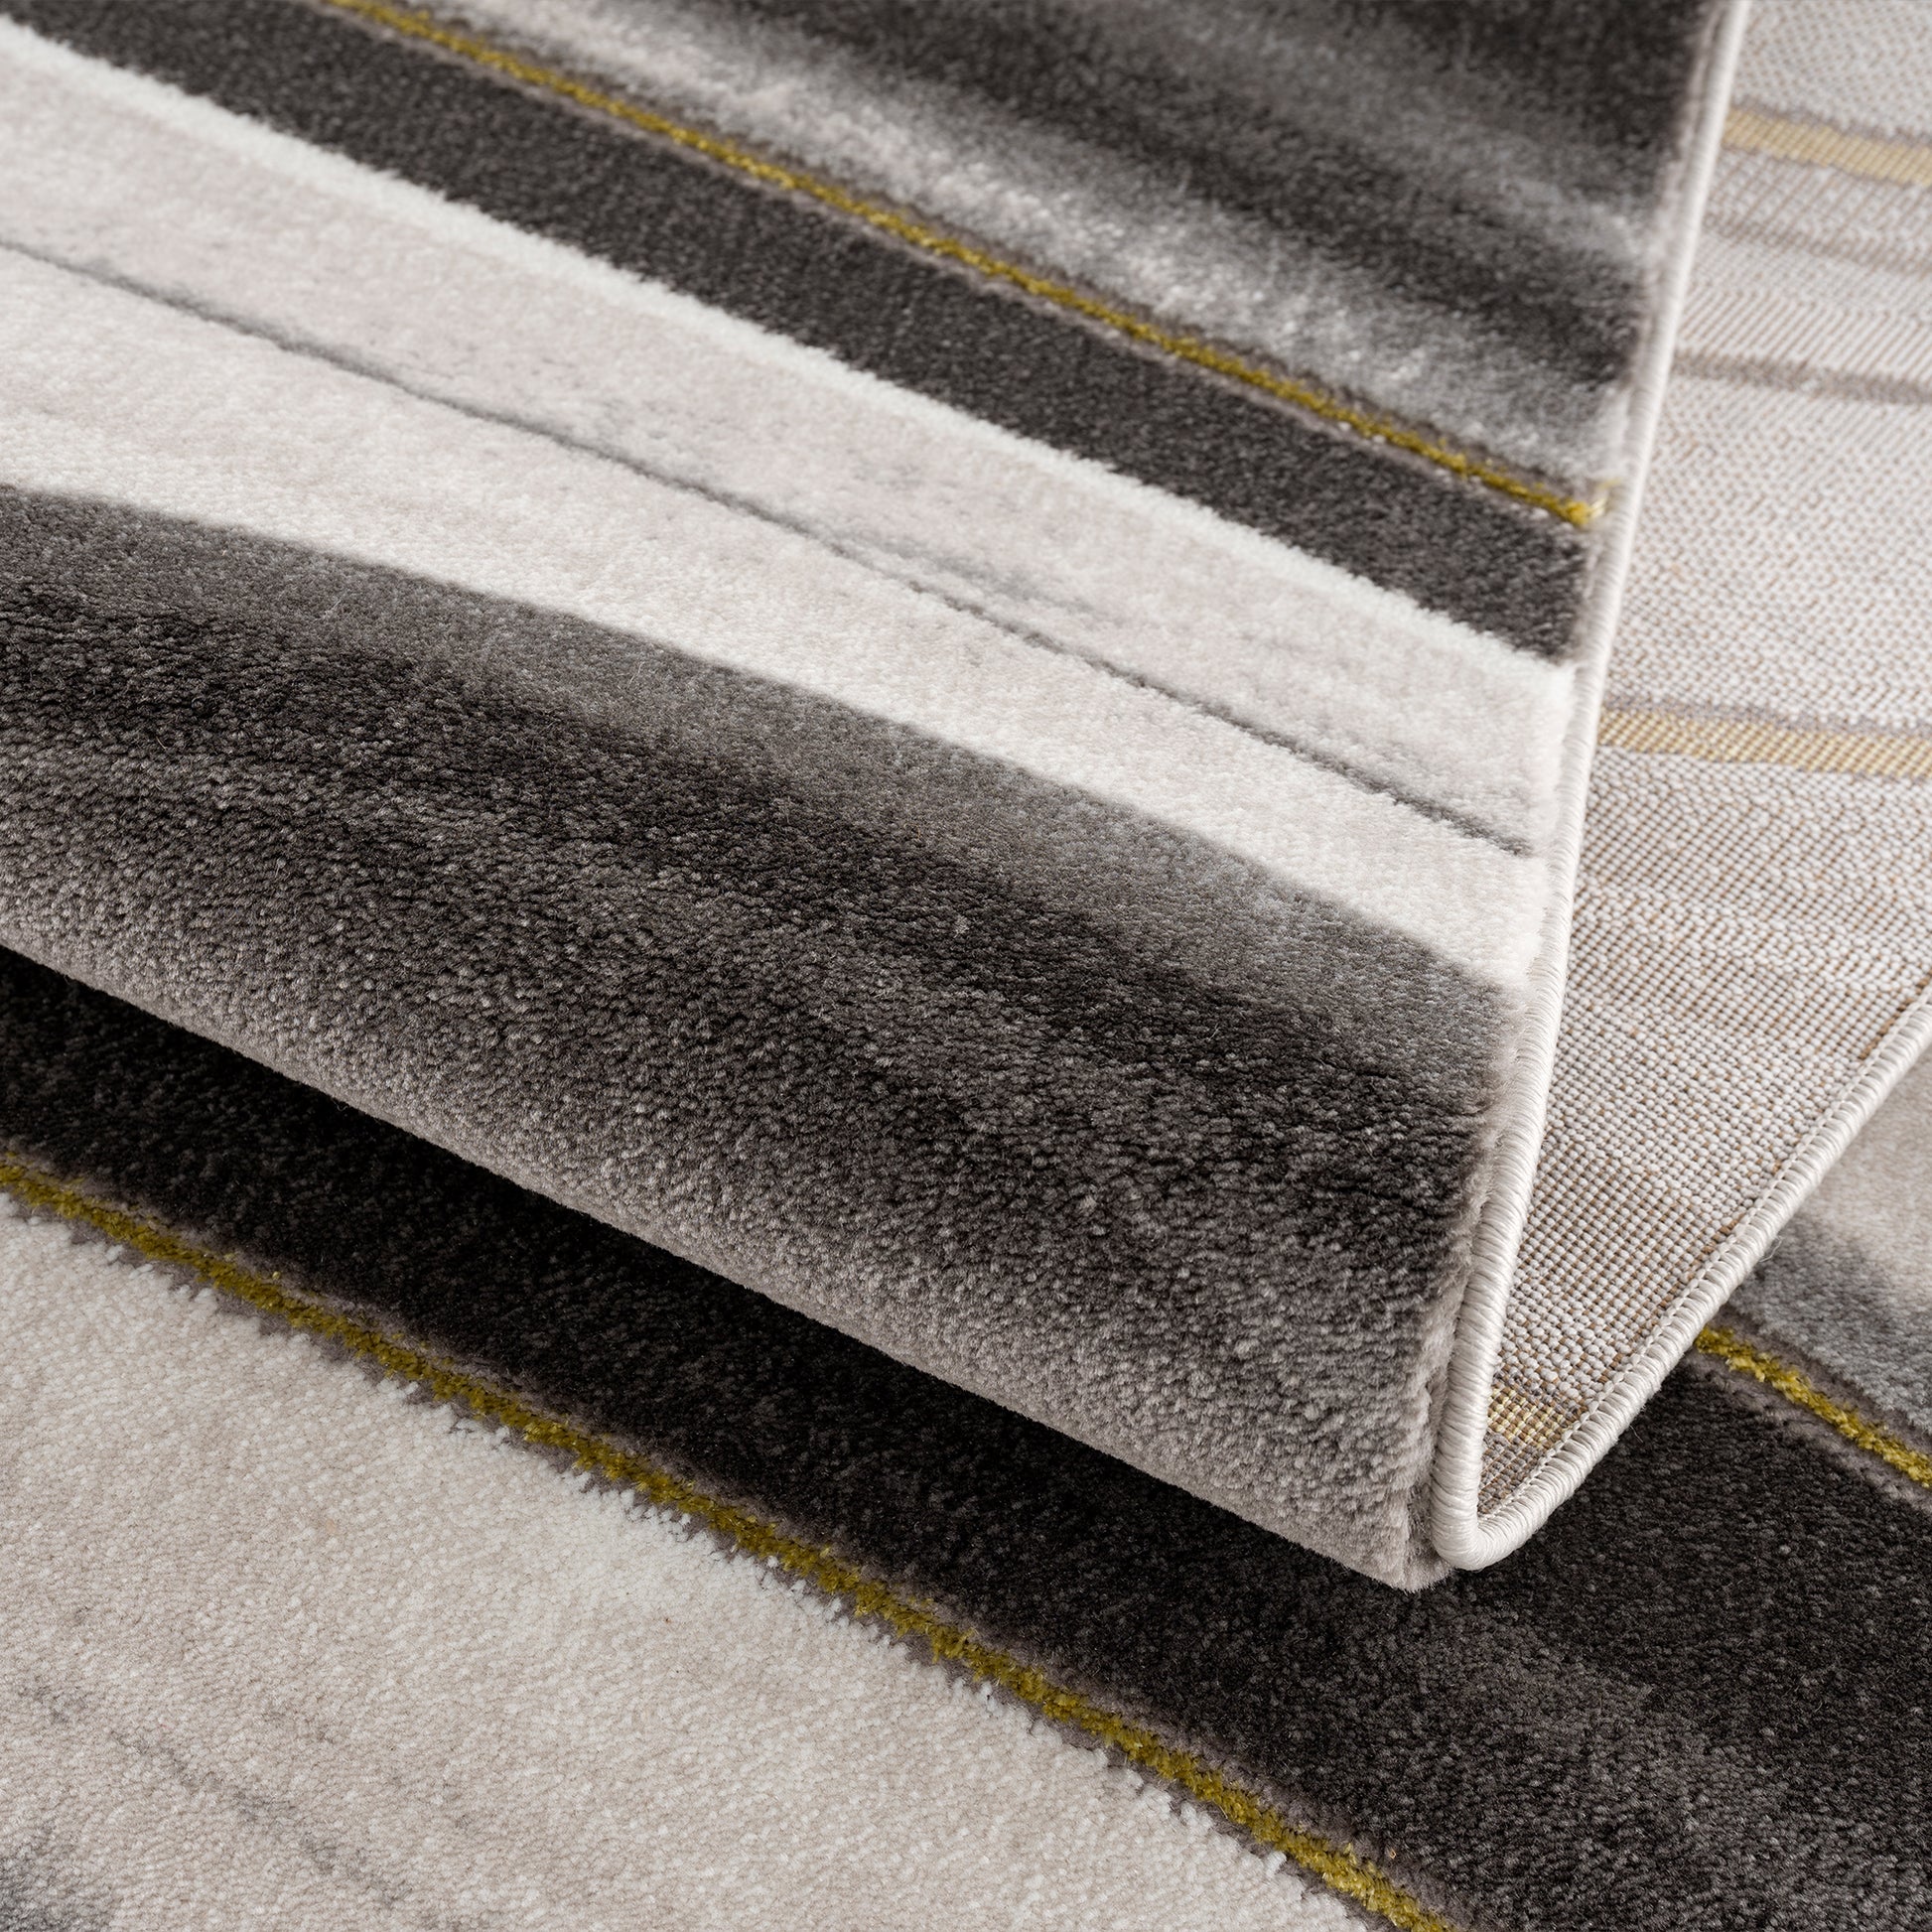 light dark grey beige gold spirals waves striped pattern abstract modern area rug 5x7, 5x8 ft Contemporary, Living Room Carpet, Bedroom, Home Office